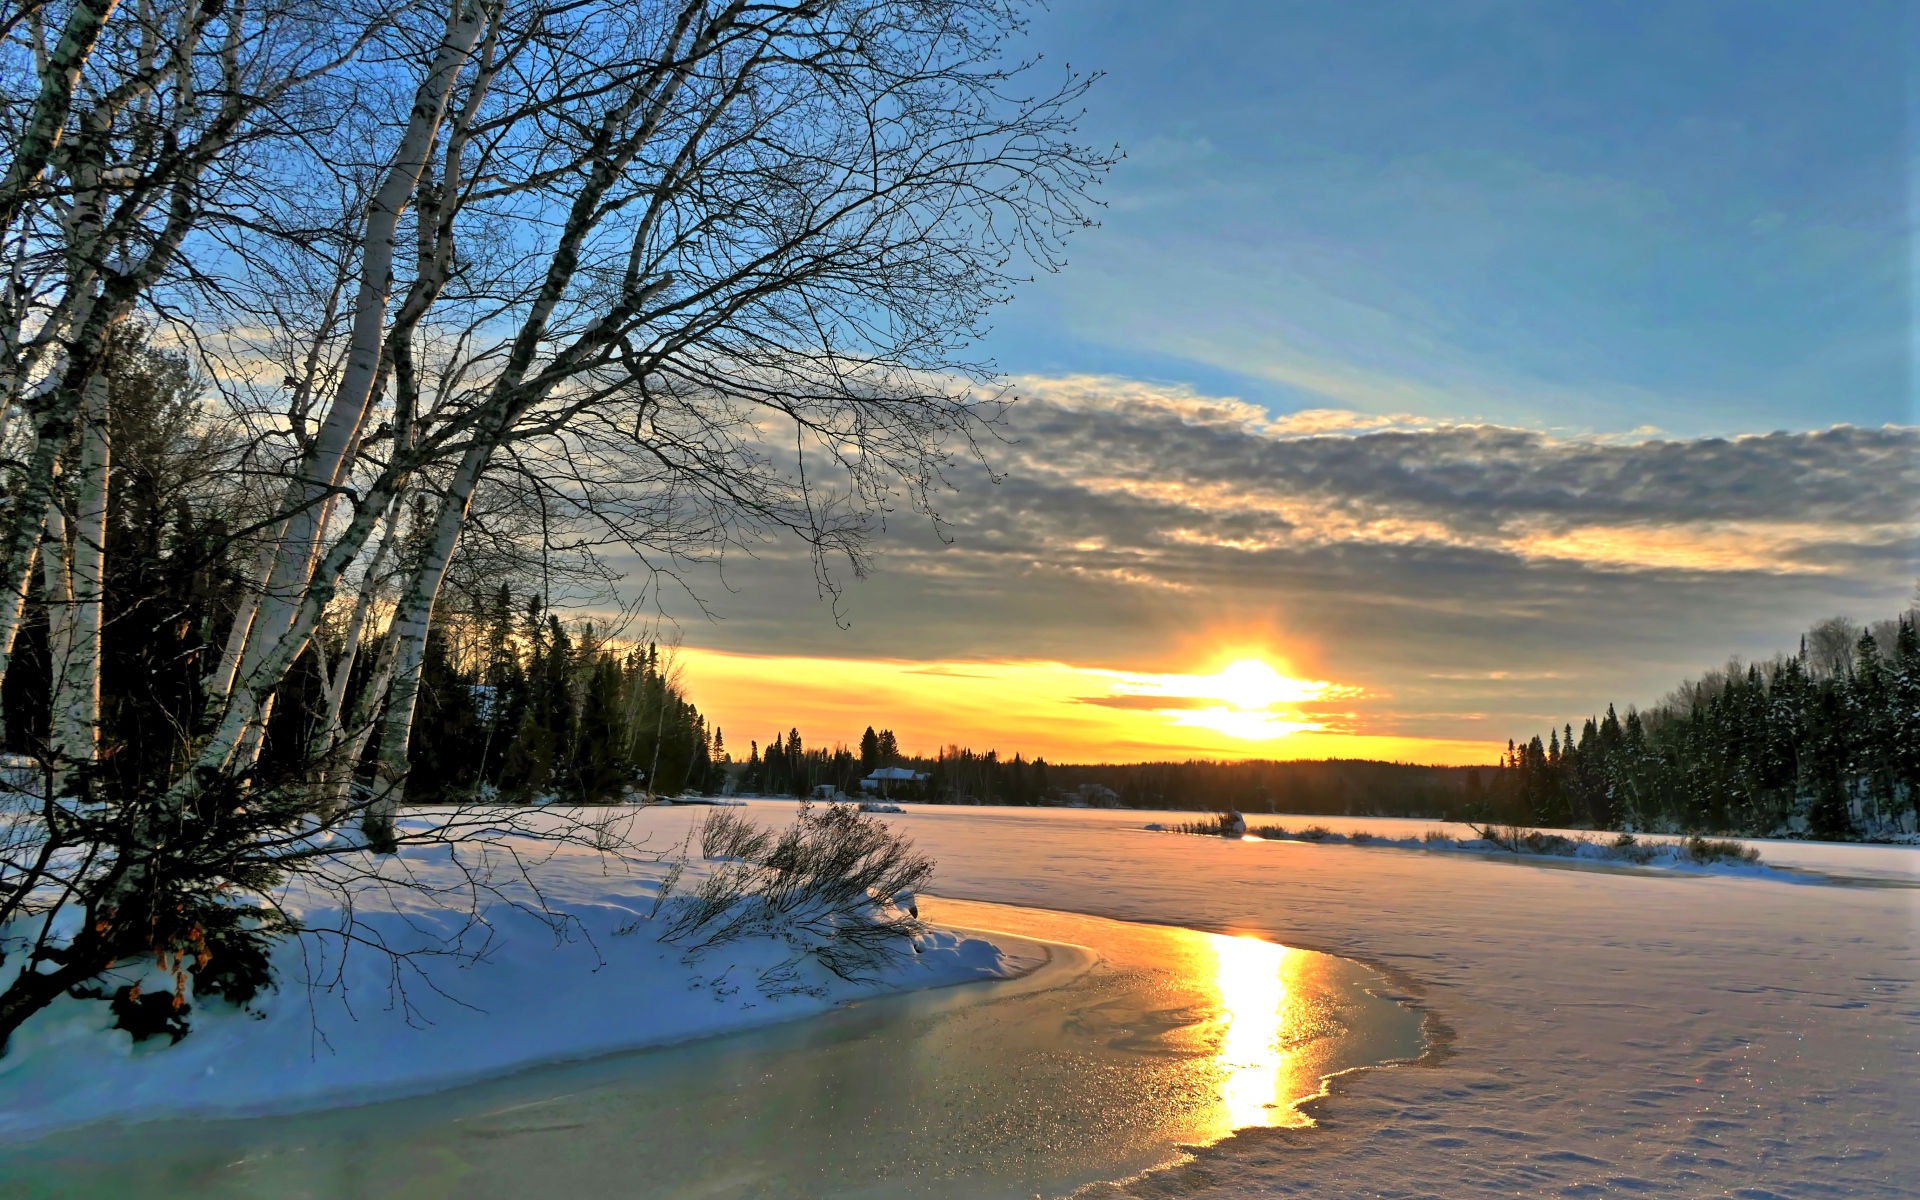 Birches on the banks of an ice-covered river at sunset in winter